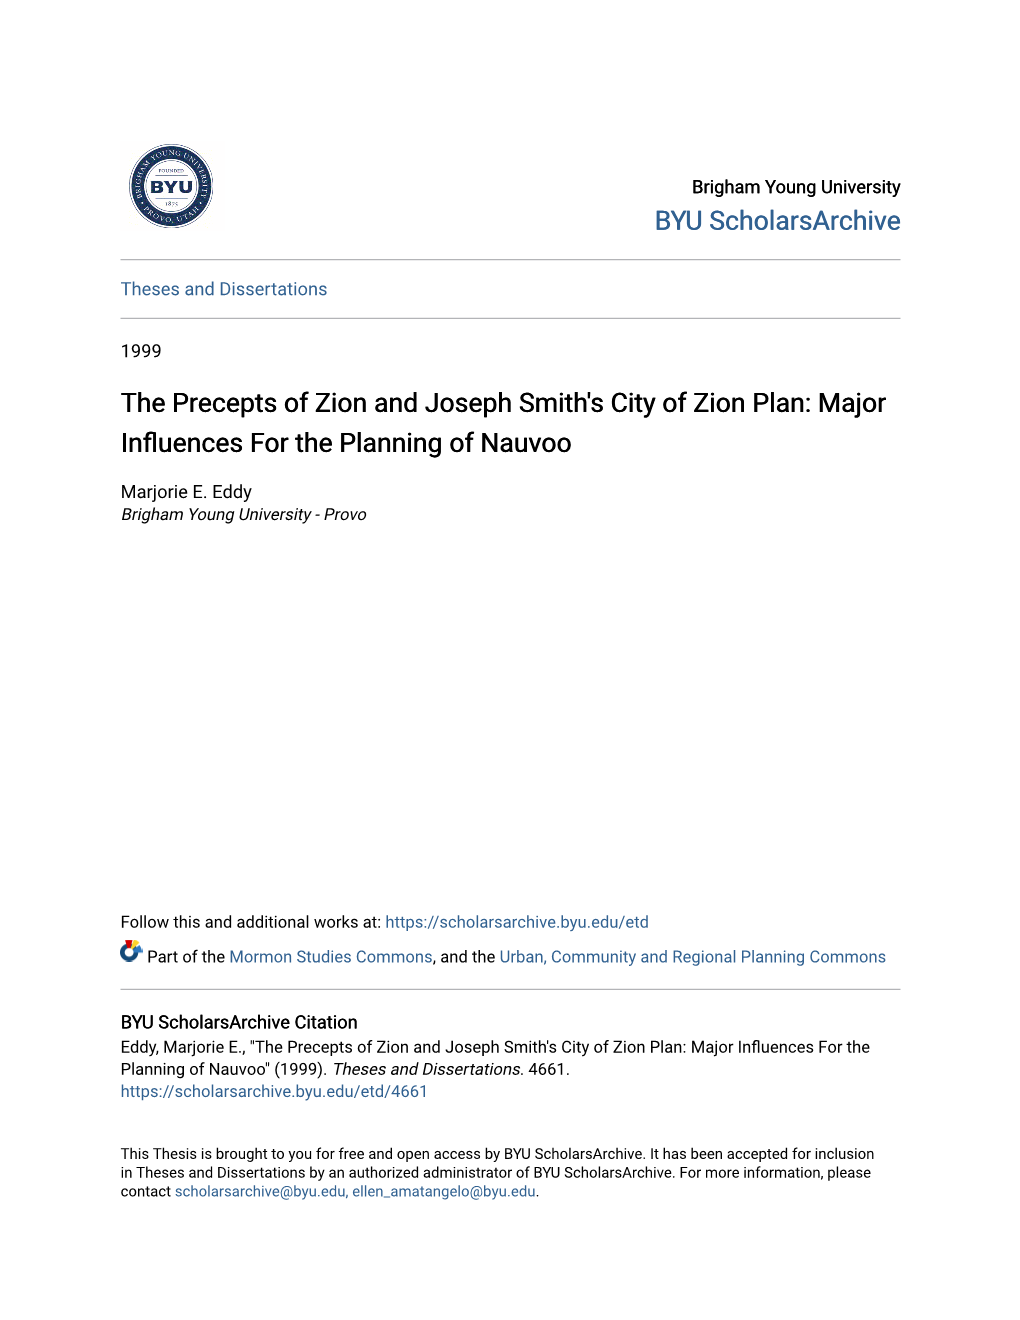 The Precepts of Zion and Joseph Smith's City of Zion Plan: Major Influences Orf the Planning of Nauvoo